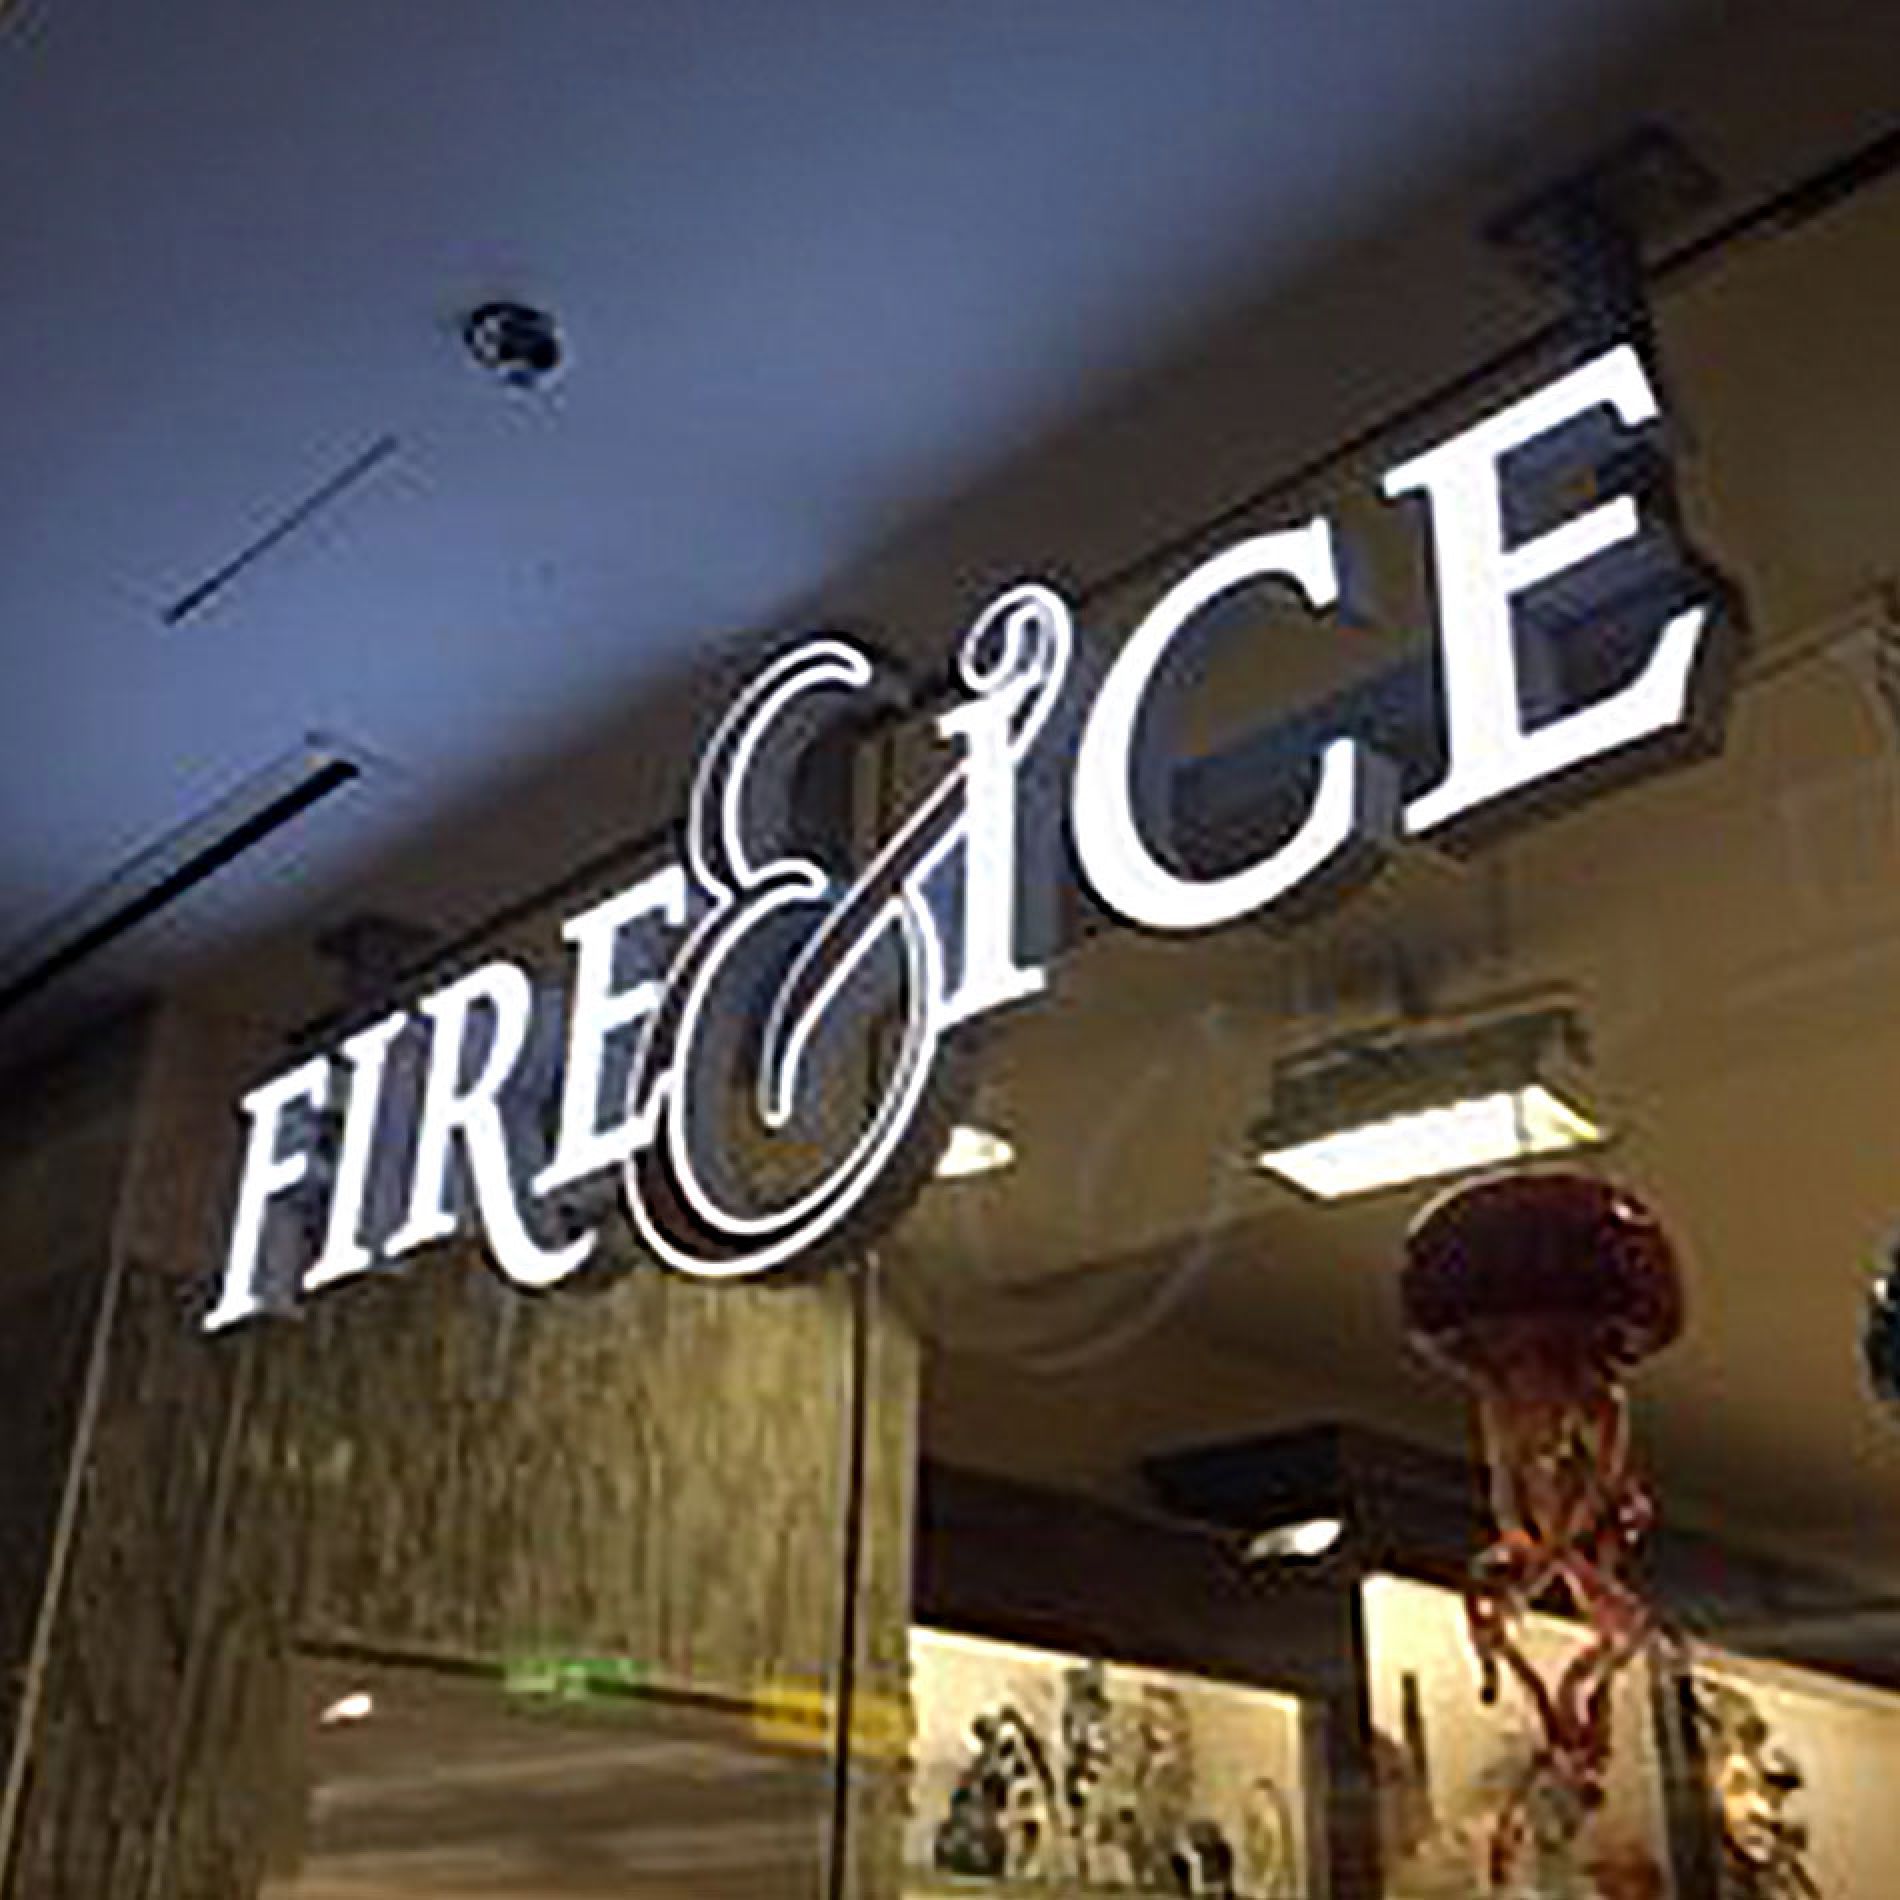 FIRE & ICE RETAIL DISPLAYS AT BWI AIRPORT